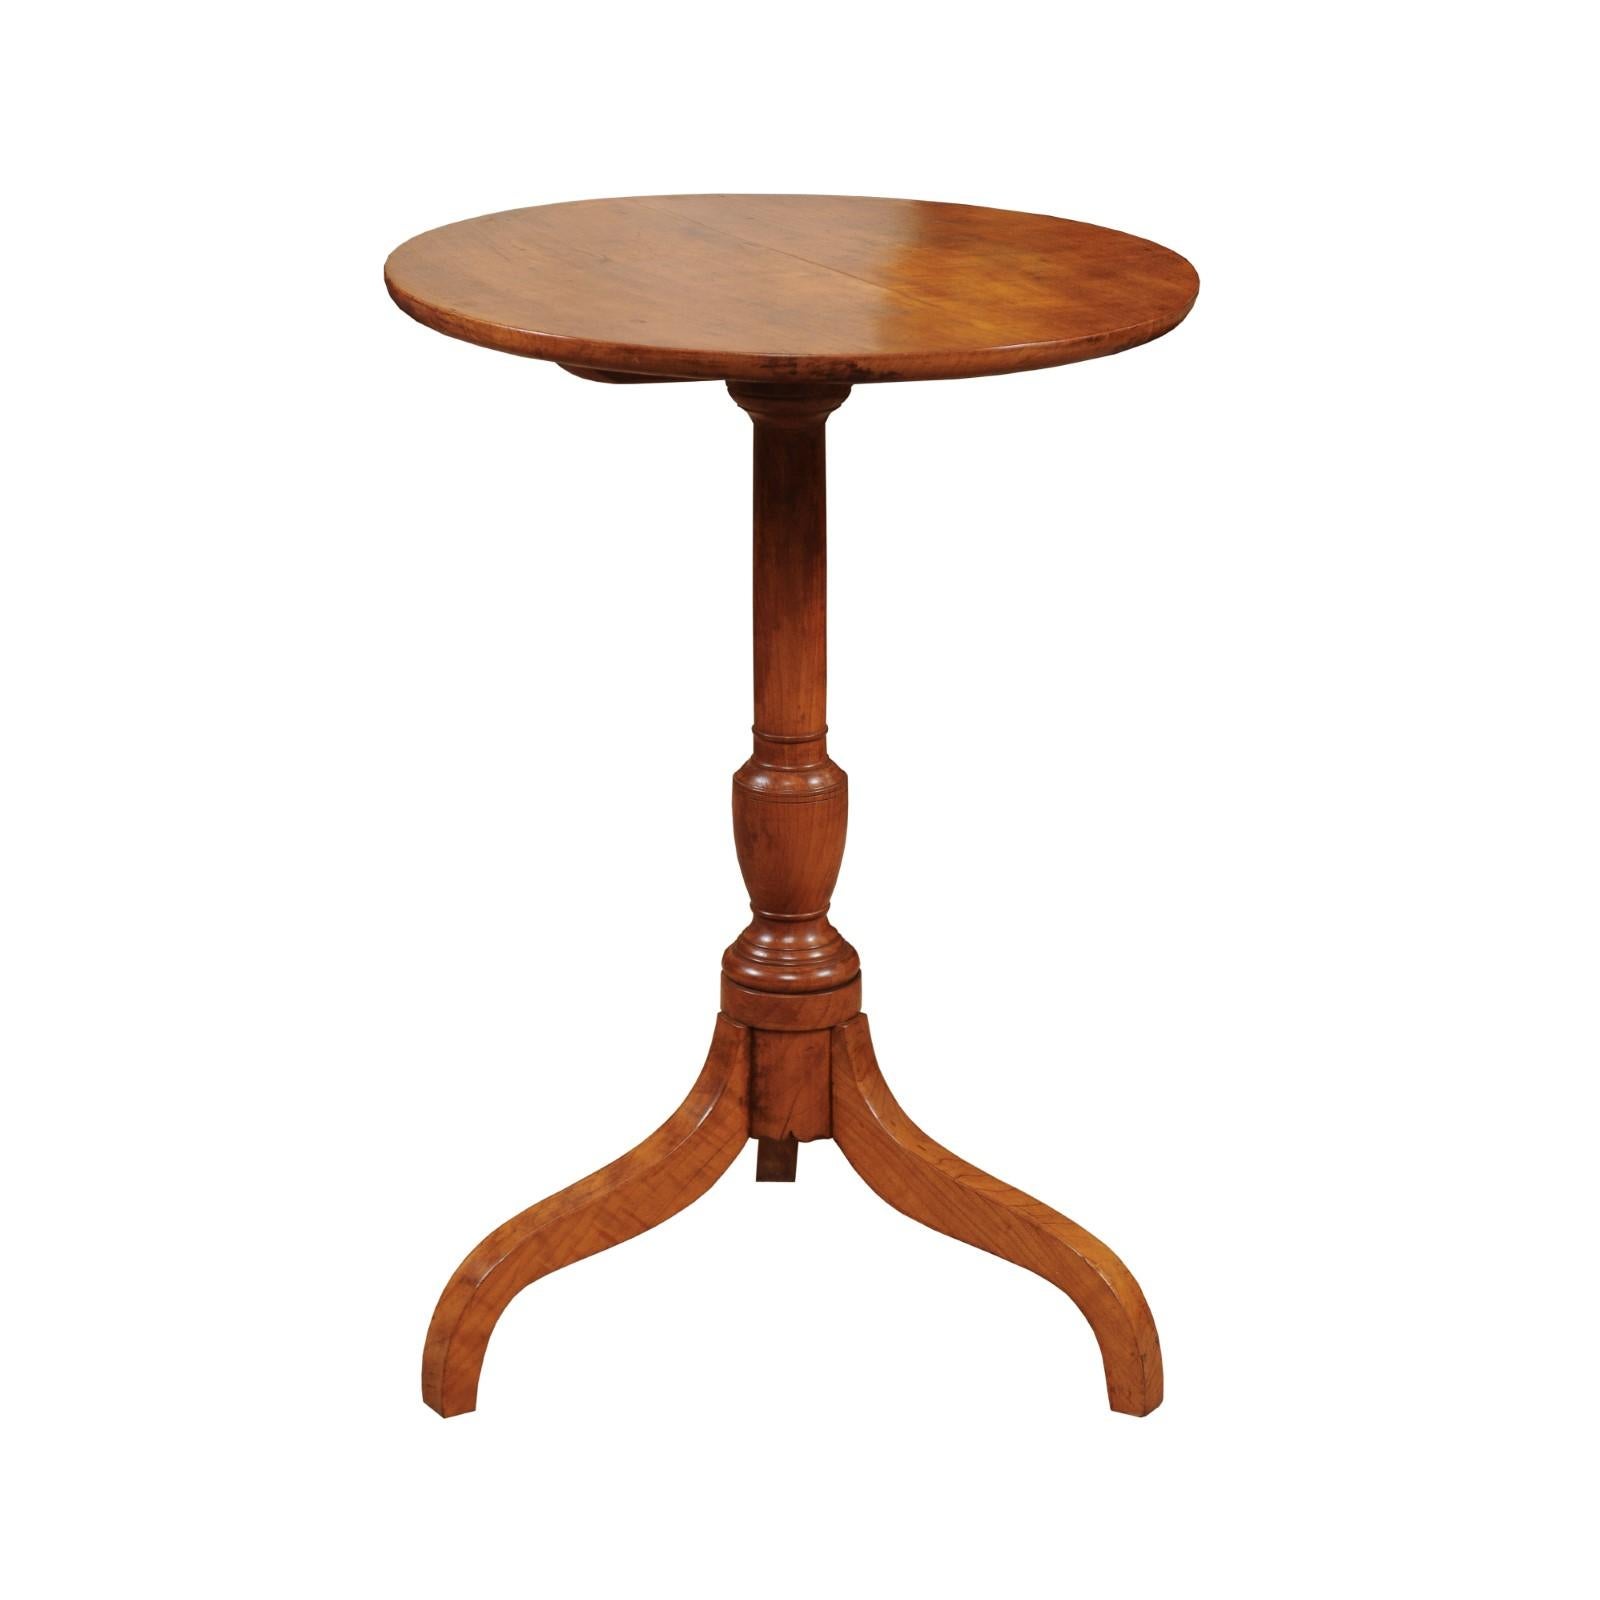 Pennsylvania Federal Style Applewood Candle Stand, 19th Century